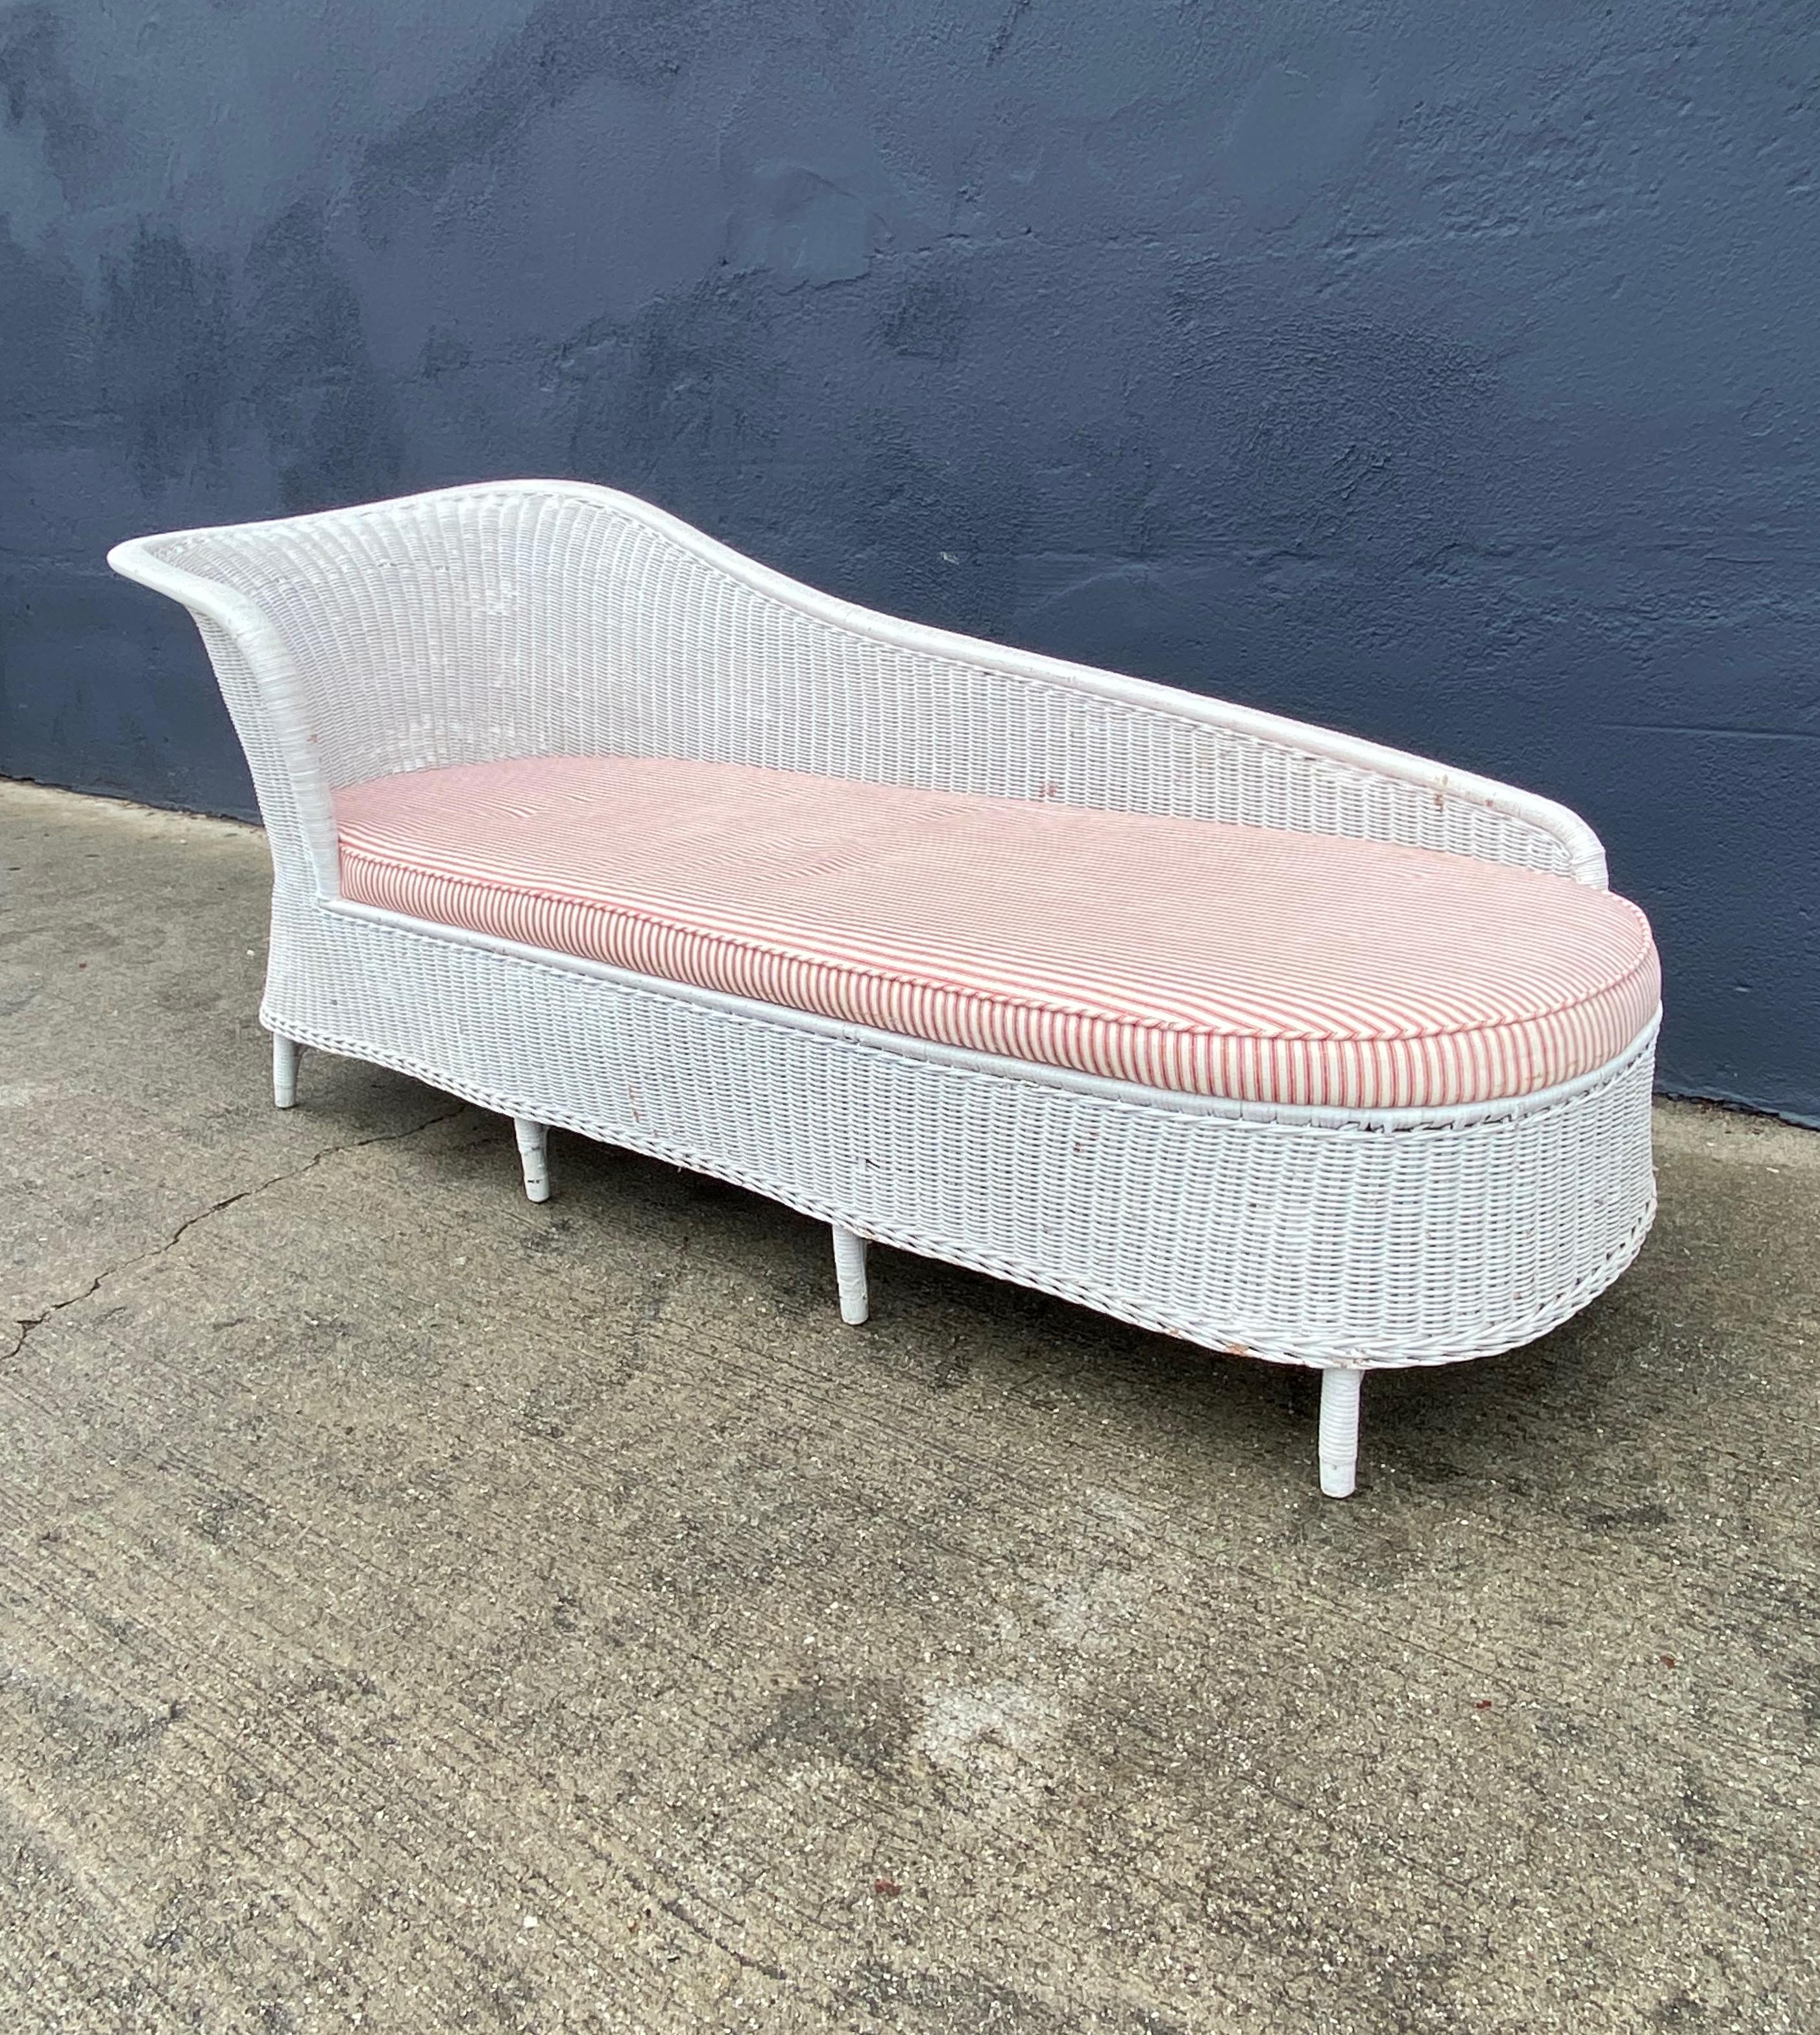 Art Deco Antique Wicker Chaise Longue or Daaybed For Sale